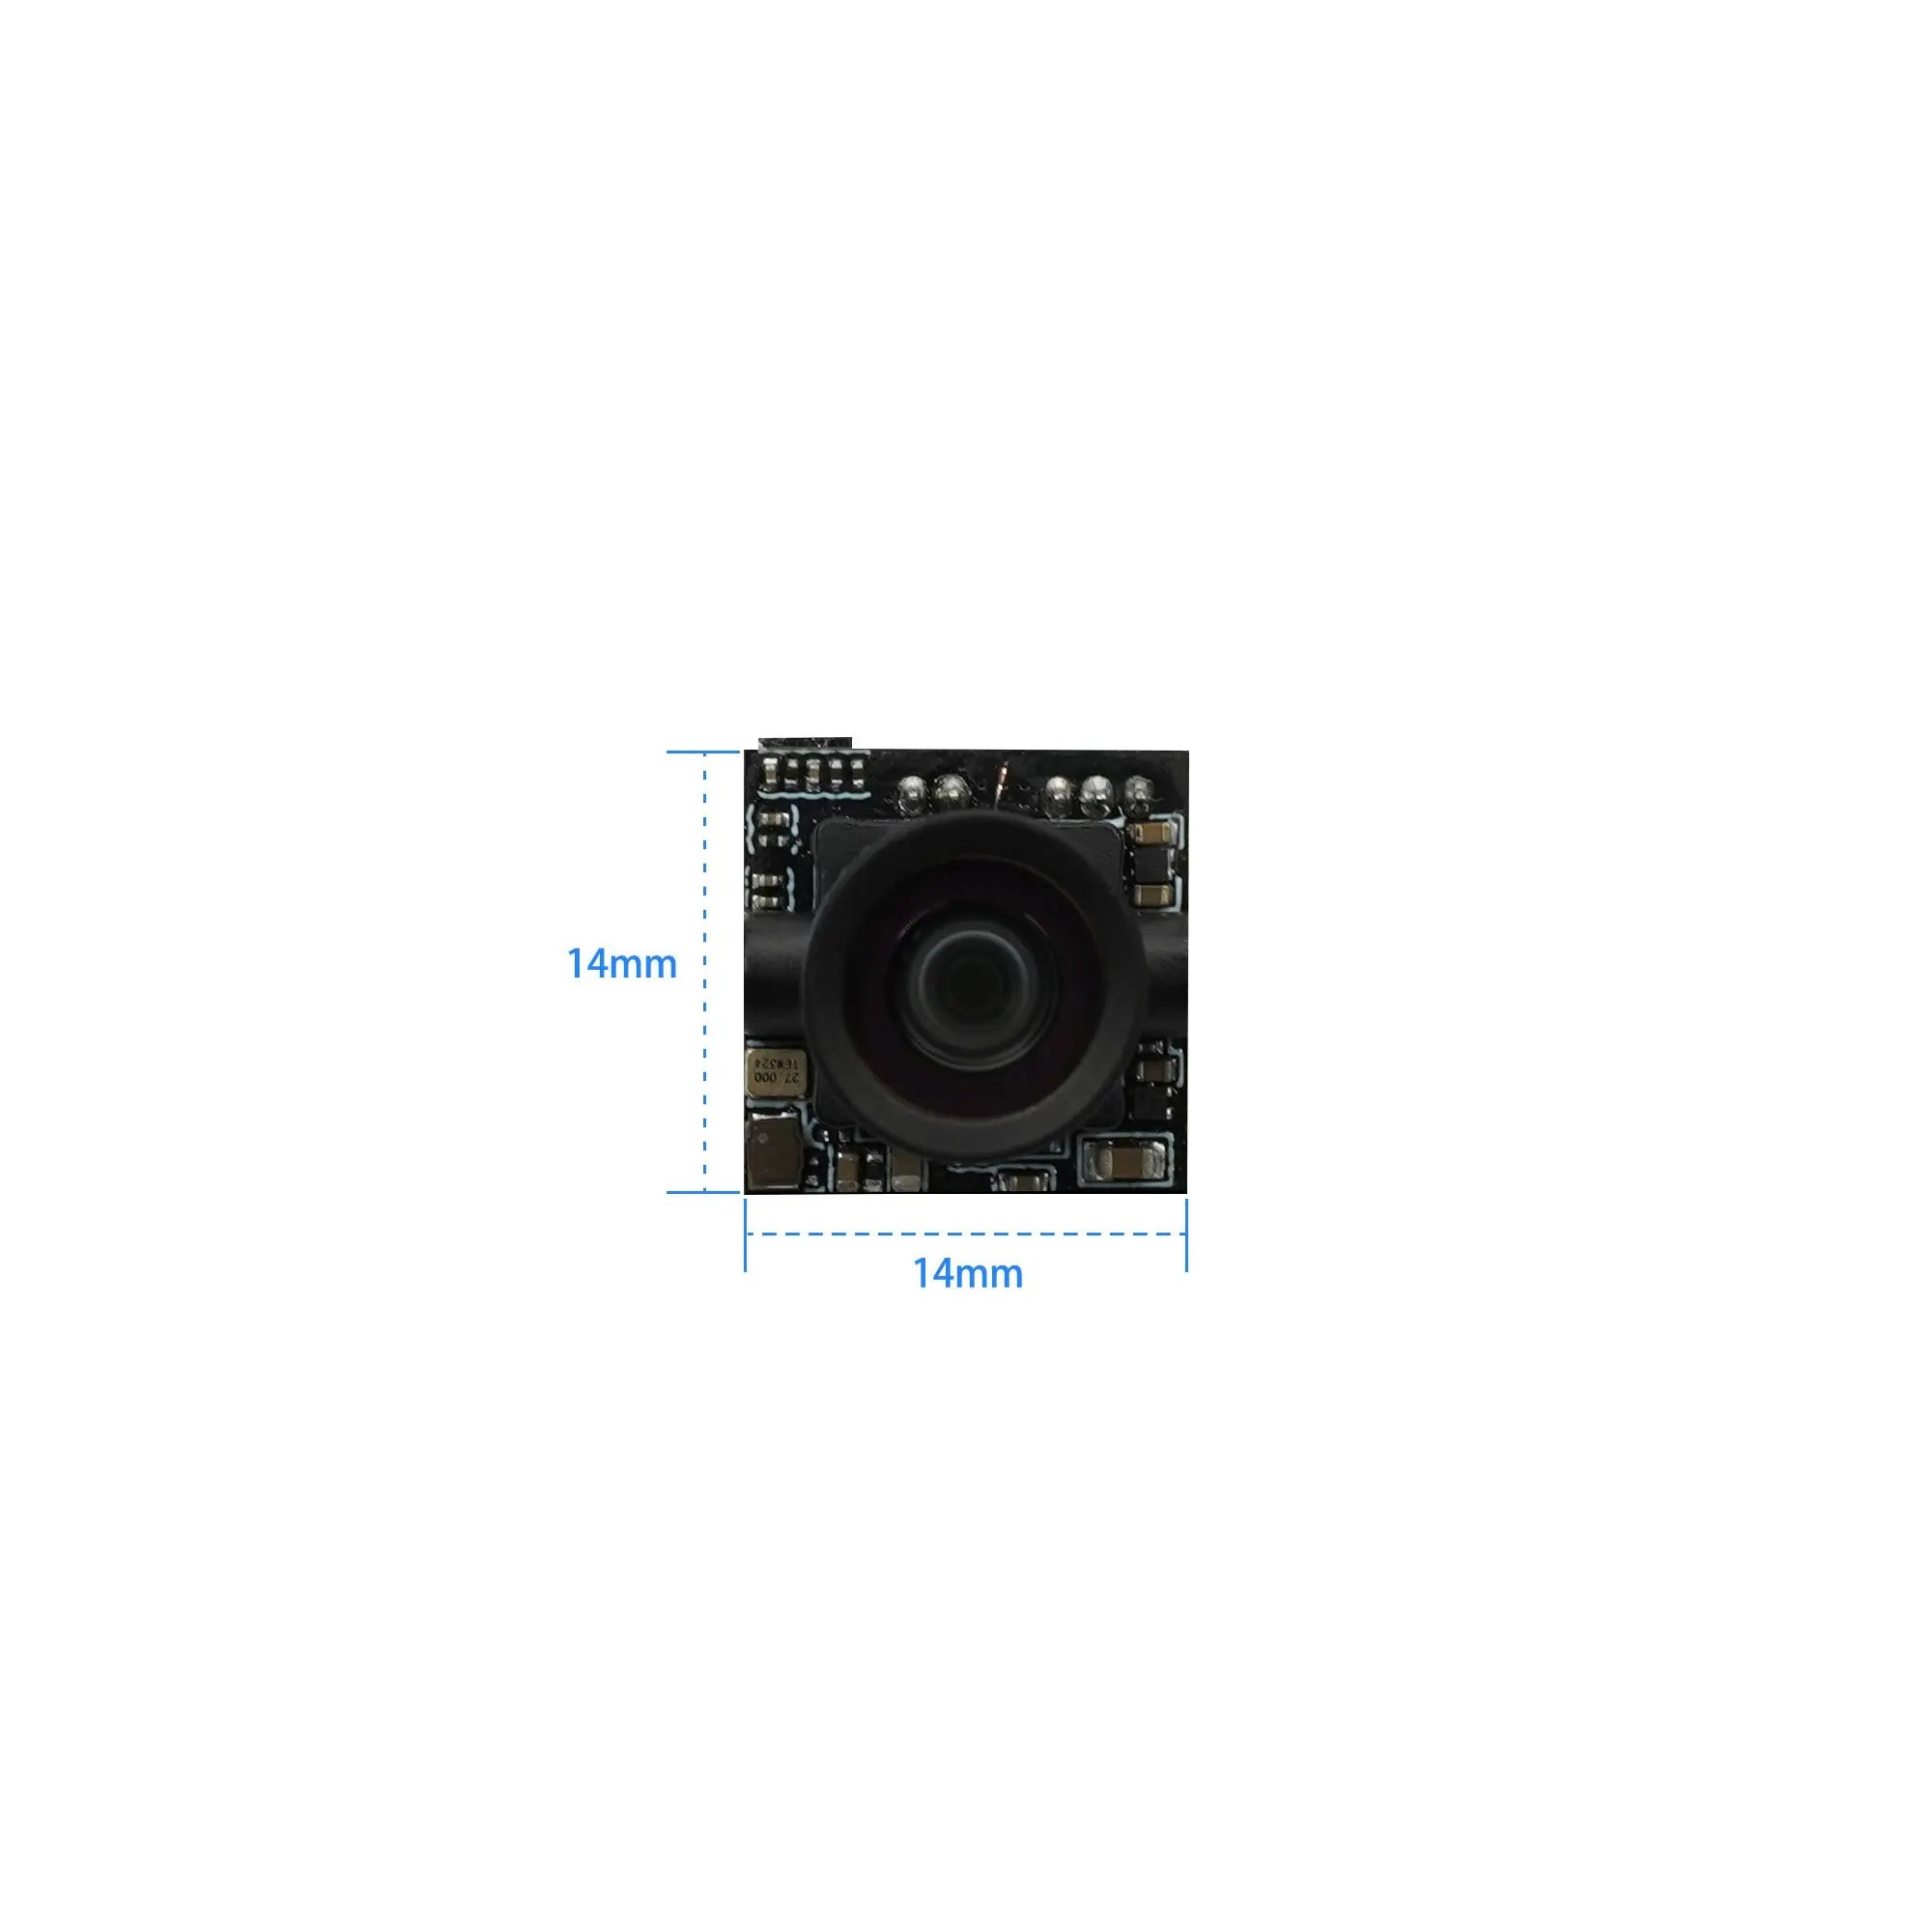 Caddx Ant Lens with high quality image Suitable for Smart16 quadcopter Includes: